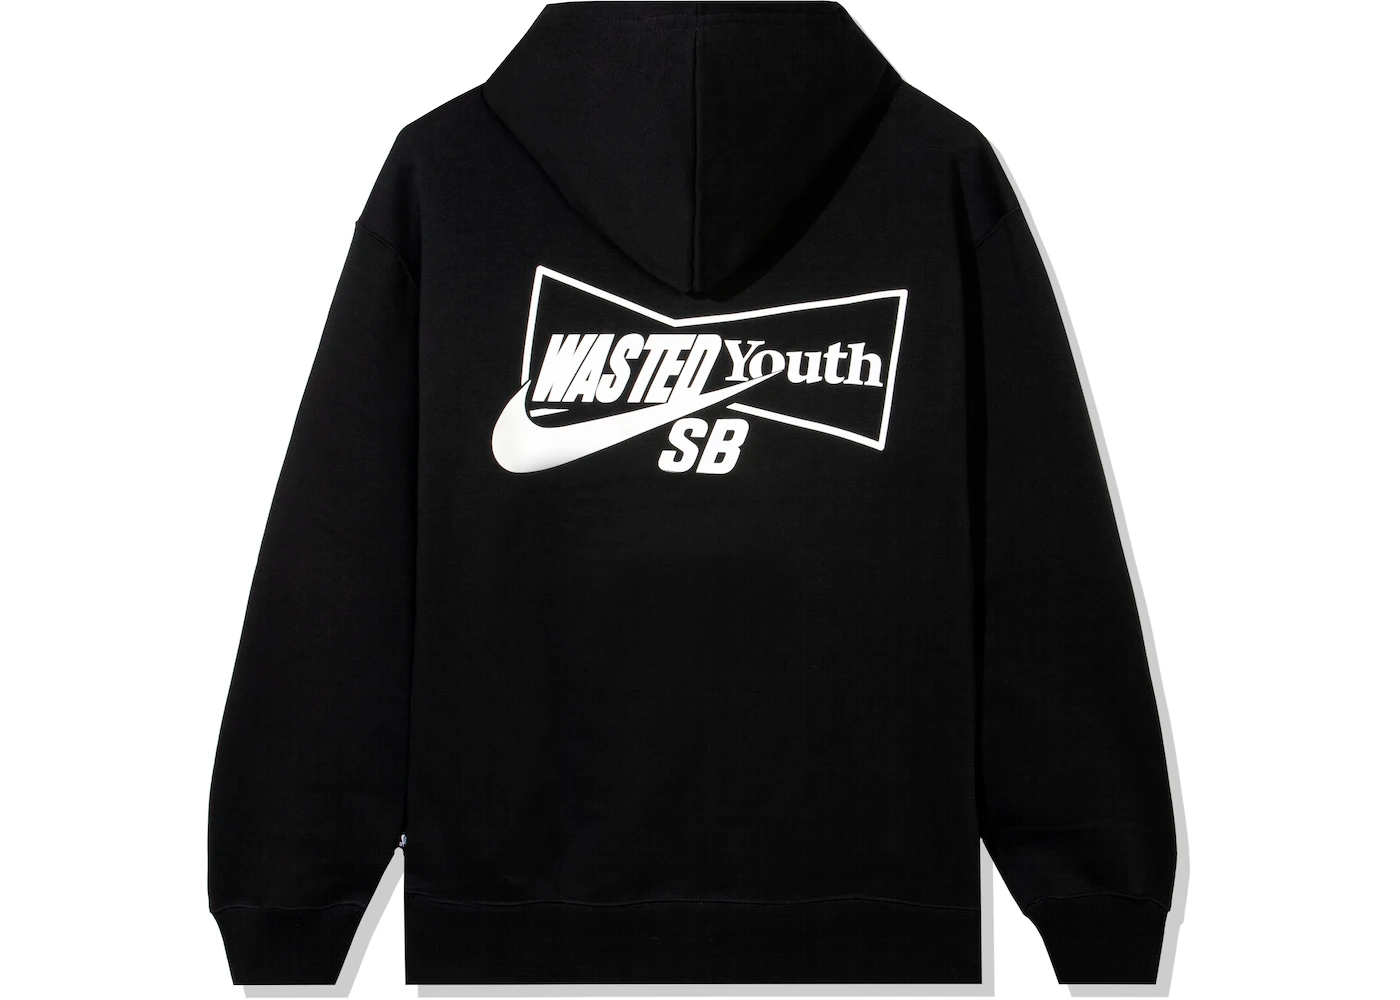 M] WASTED YOUTH x Nike SB HOODY | www.myglobaltax.com